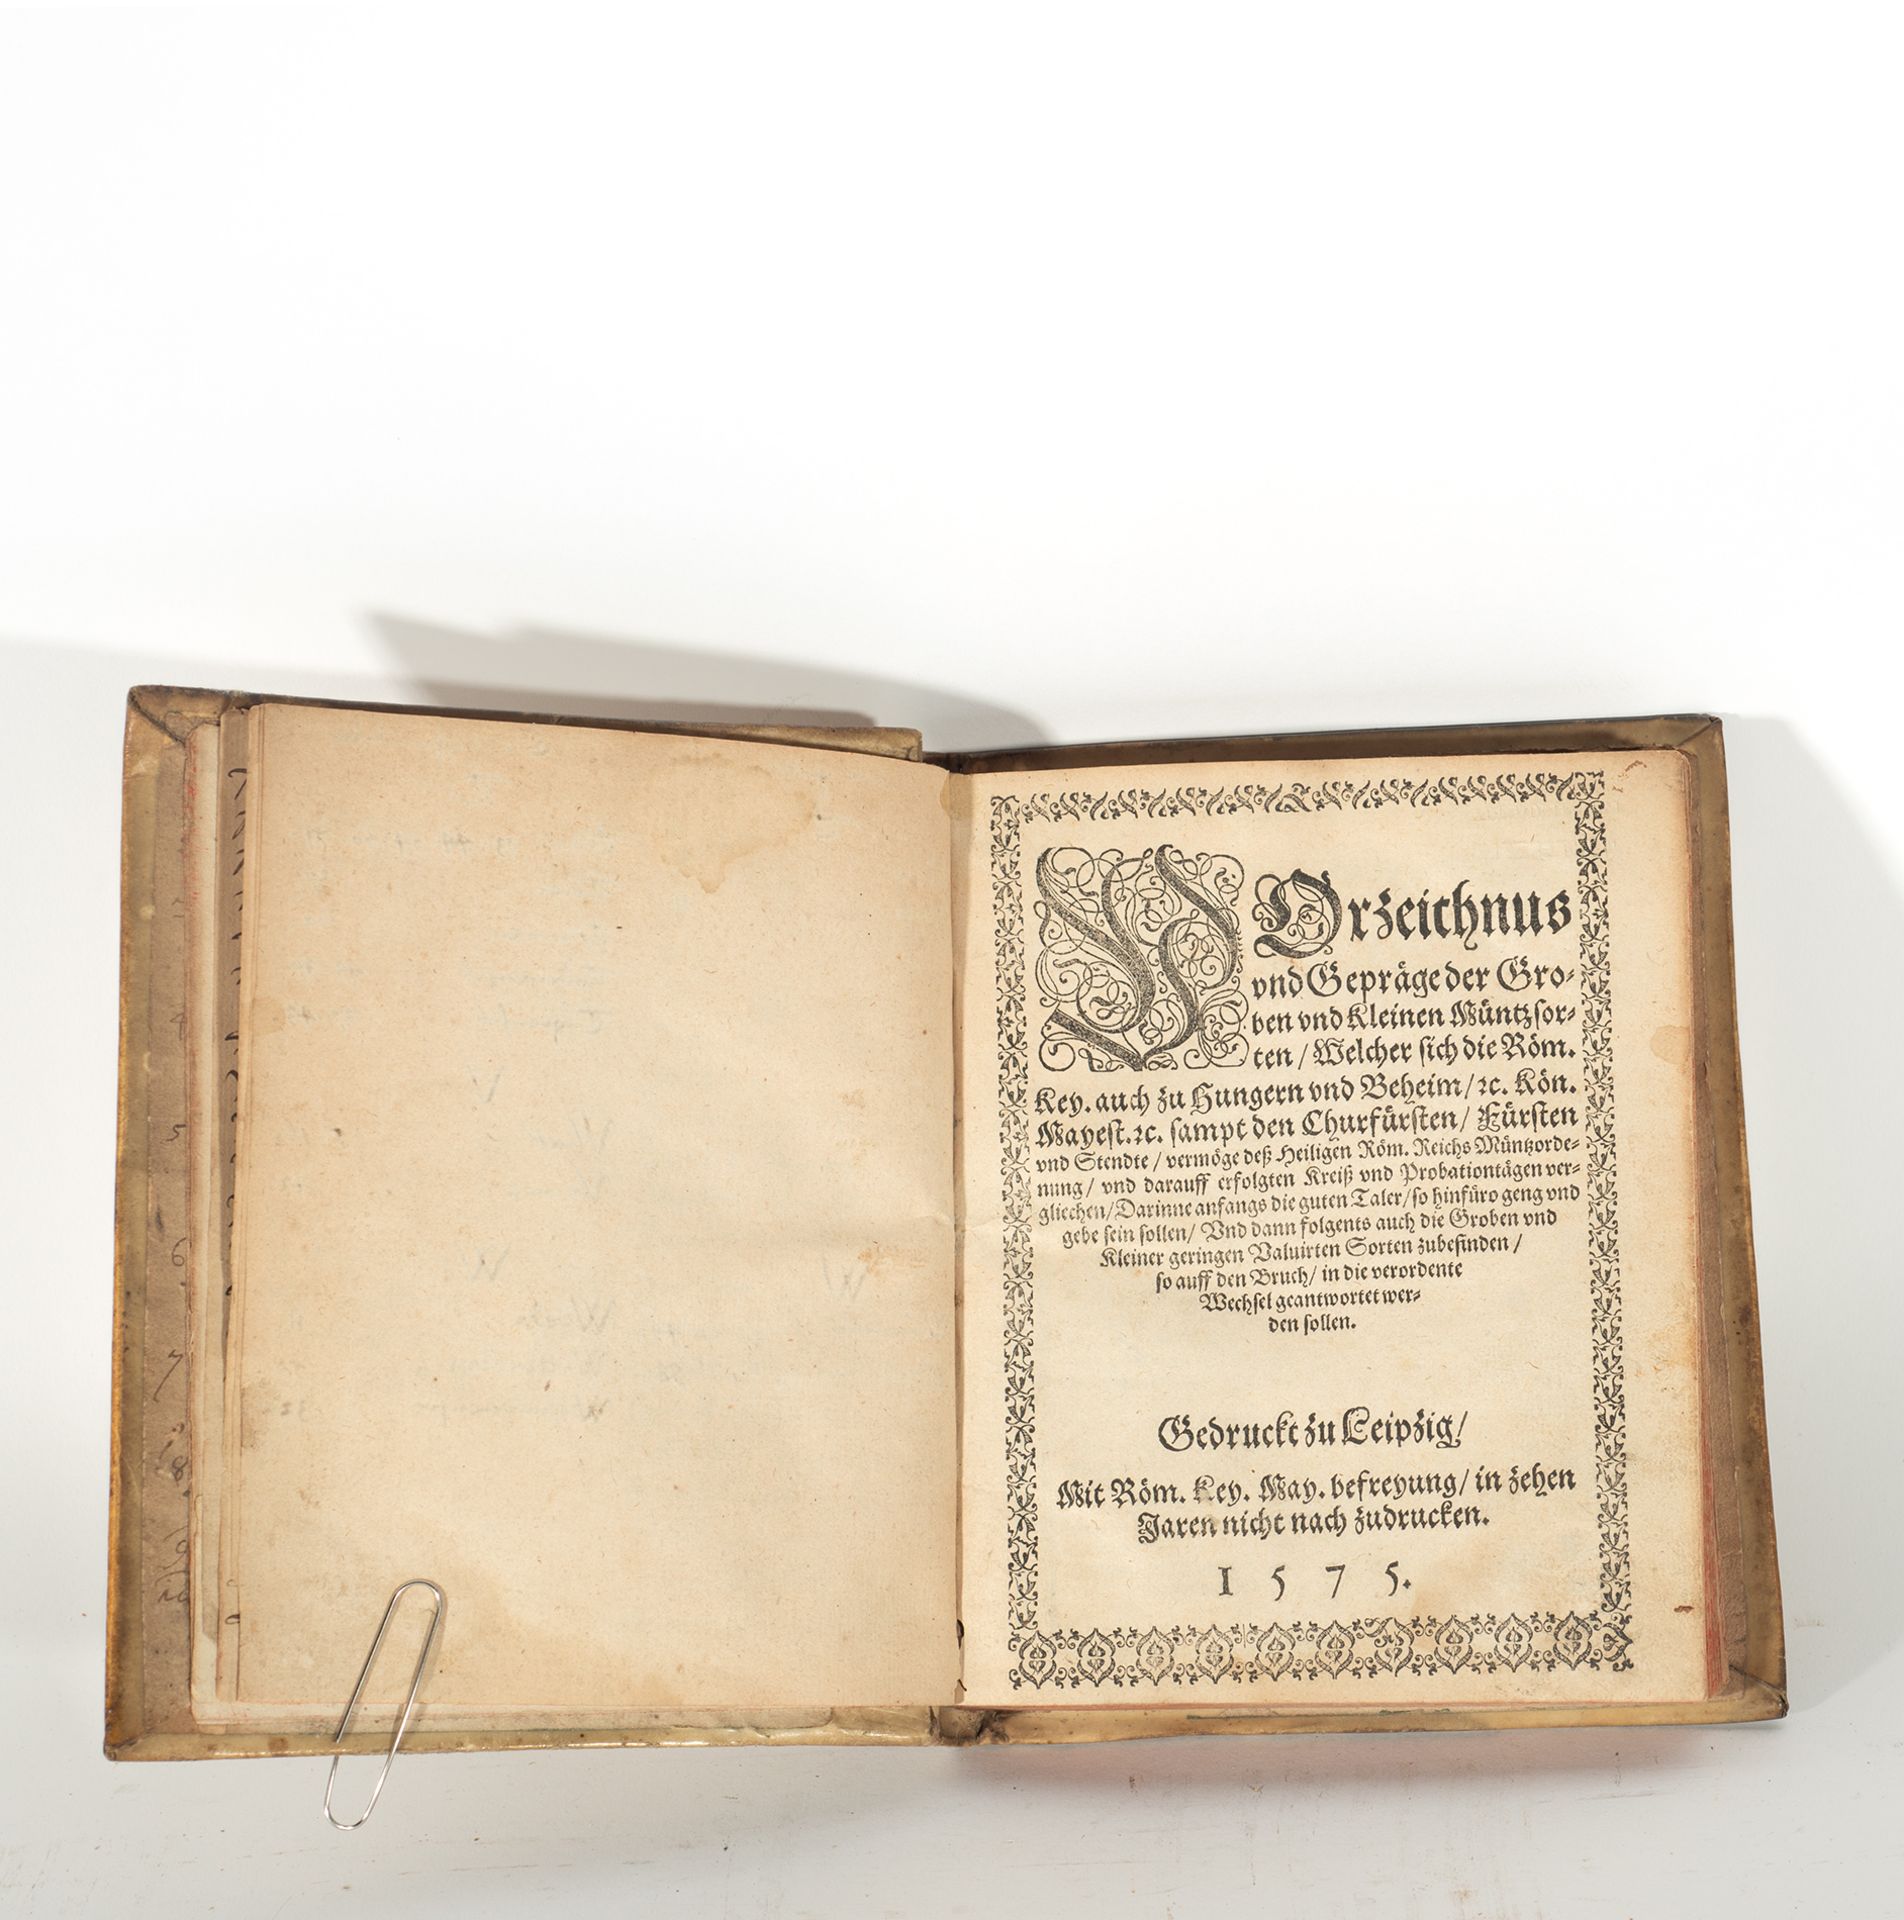 German book of exchange rates, 16th century, Leipzig, dated 1575